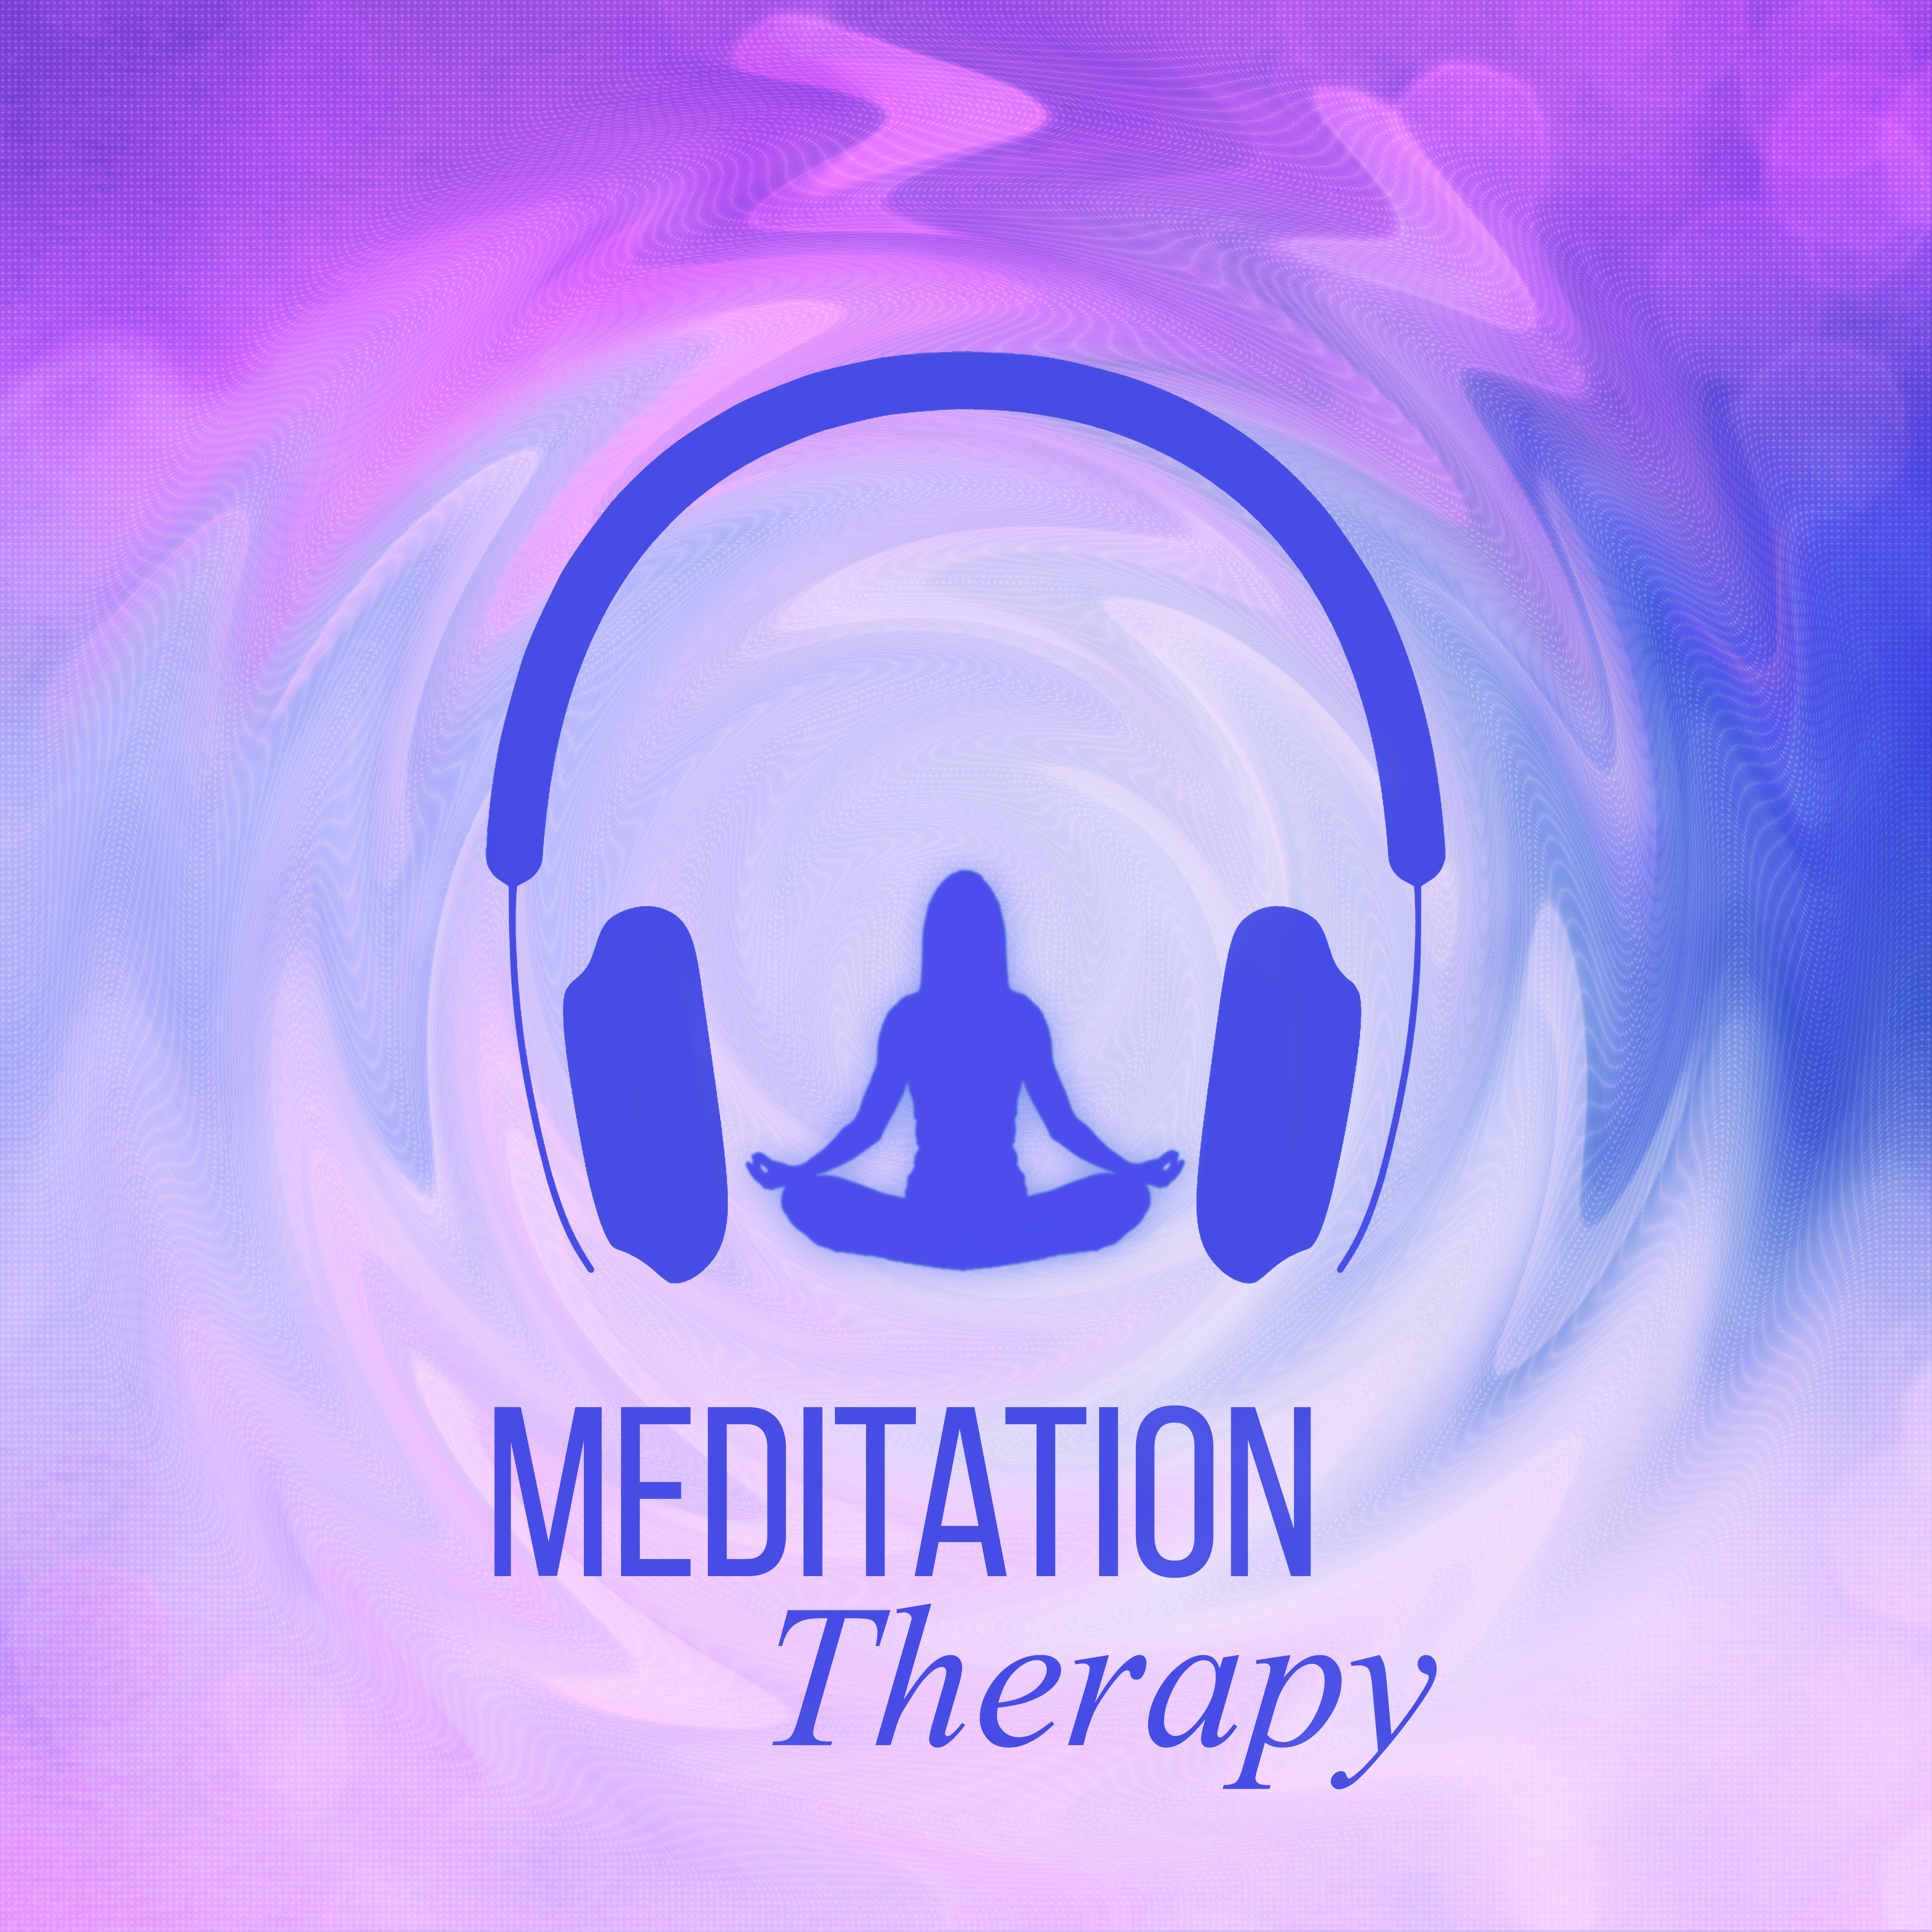 Meditation Therapy - Relaxation Meditation, Sounds of Nature, Soothing Music for Yoga, Instrumental Music for Massage Therapy, Relaxing Flute